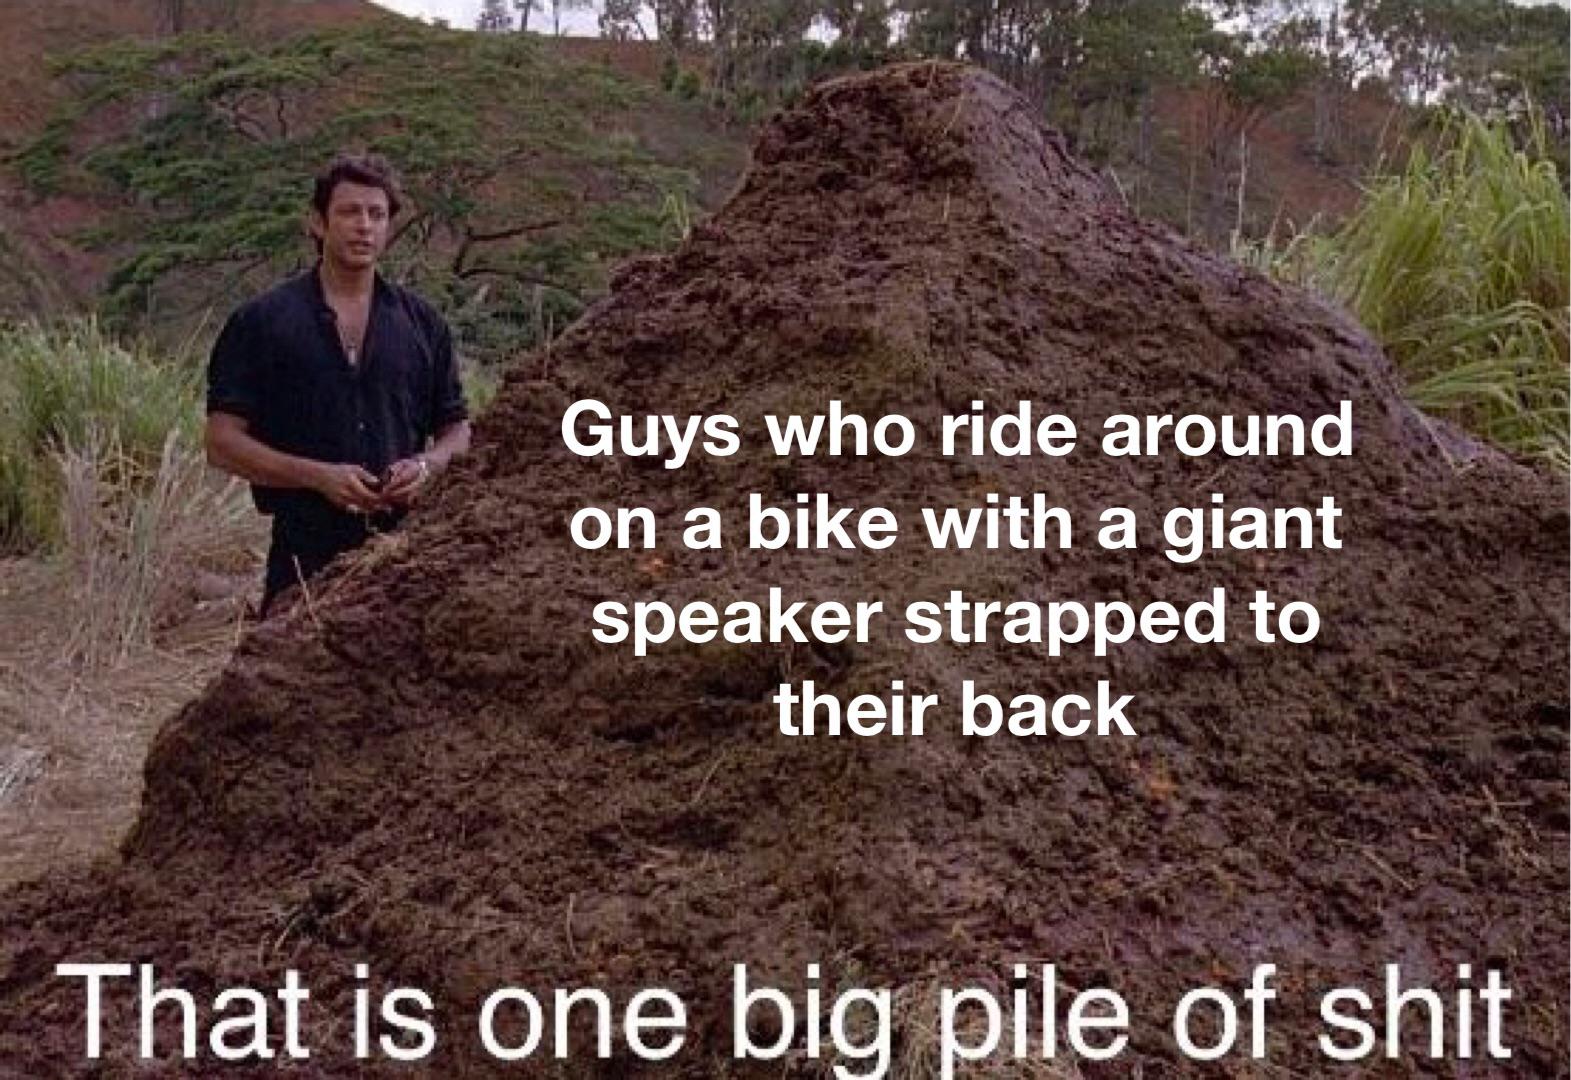 soil - Guys who ride around on a bike with a giant speaker strapped to their back That is one big pile of shit